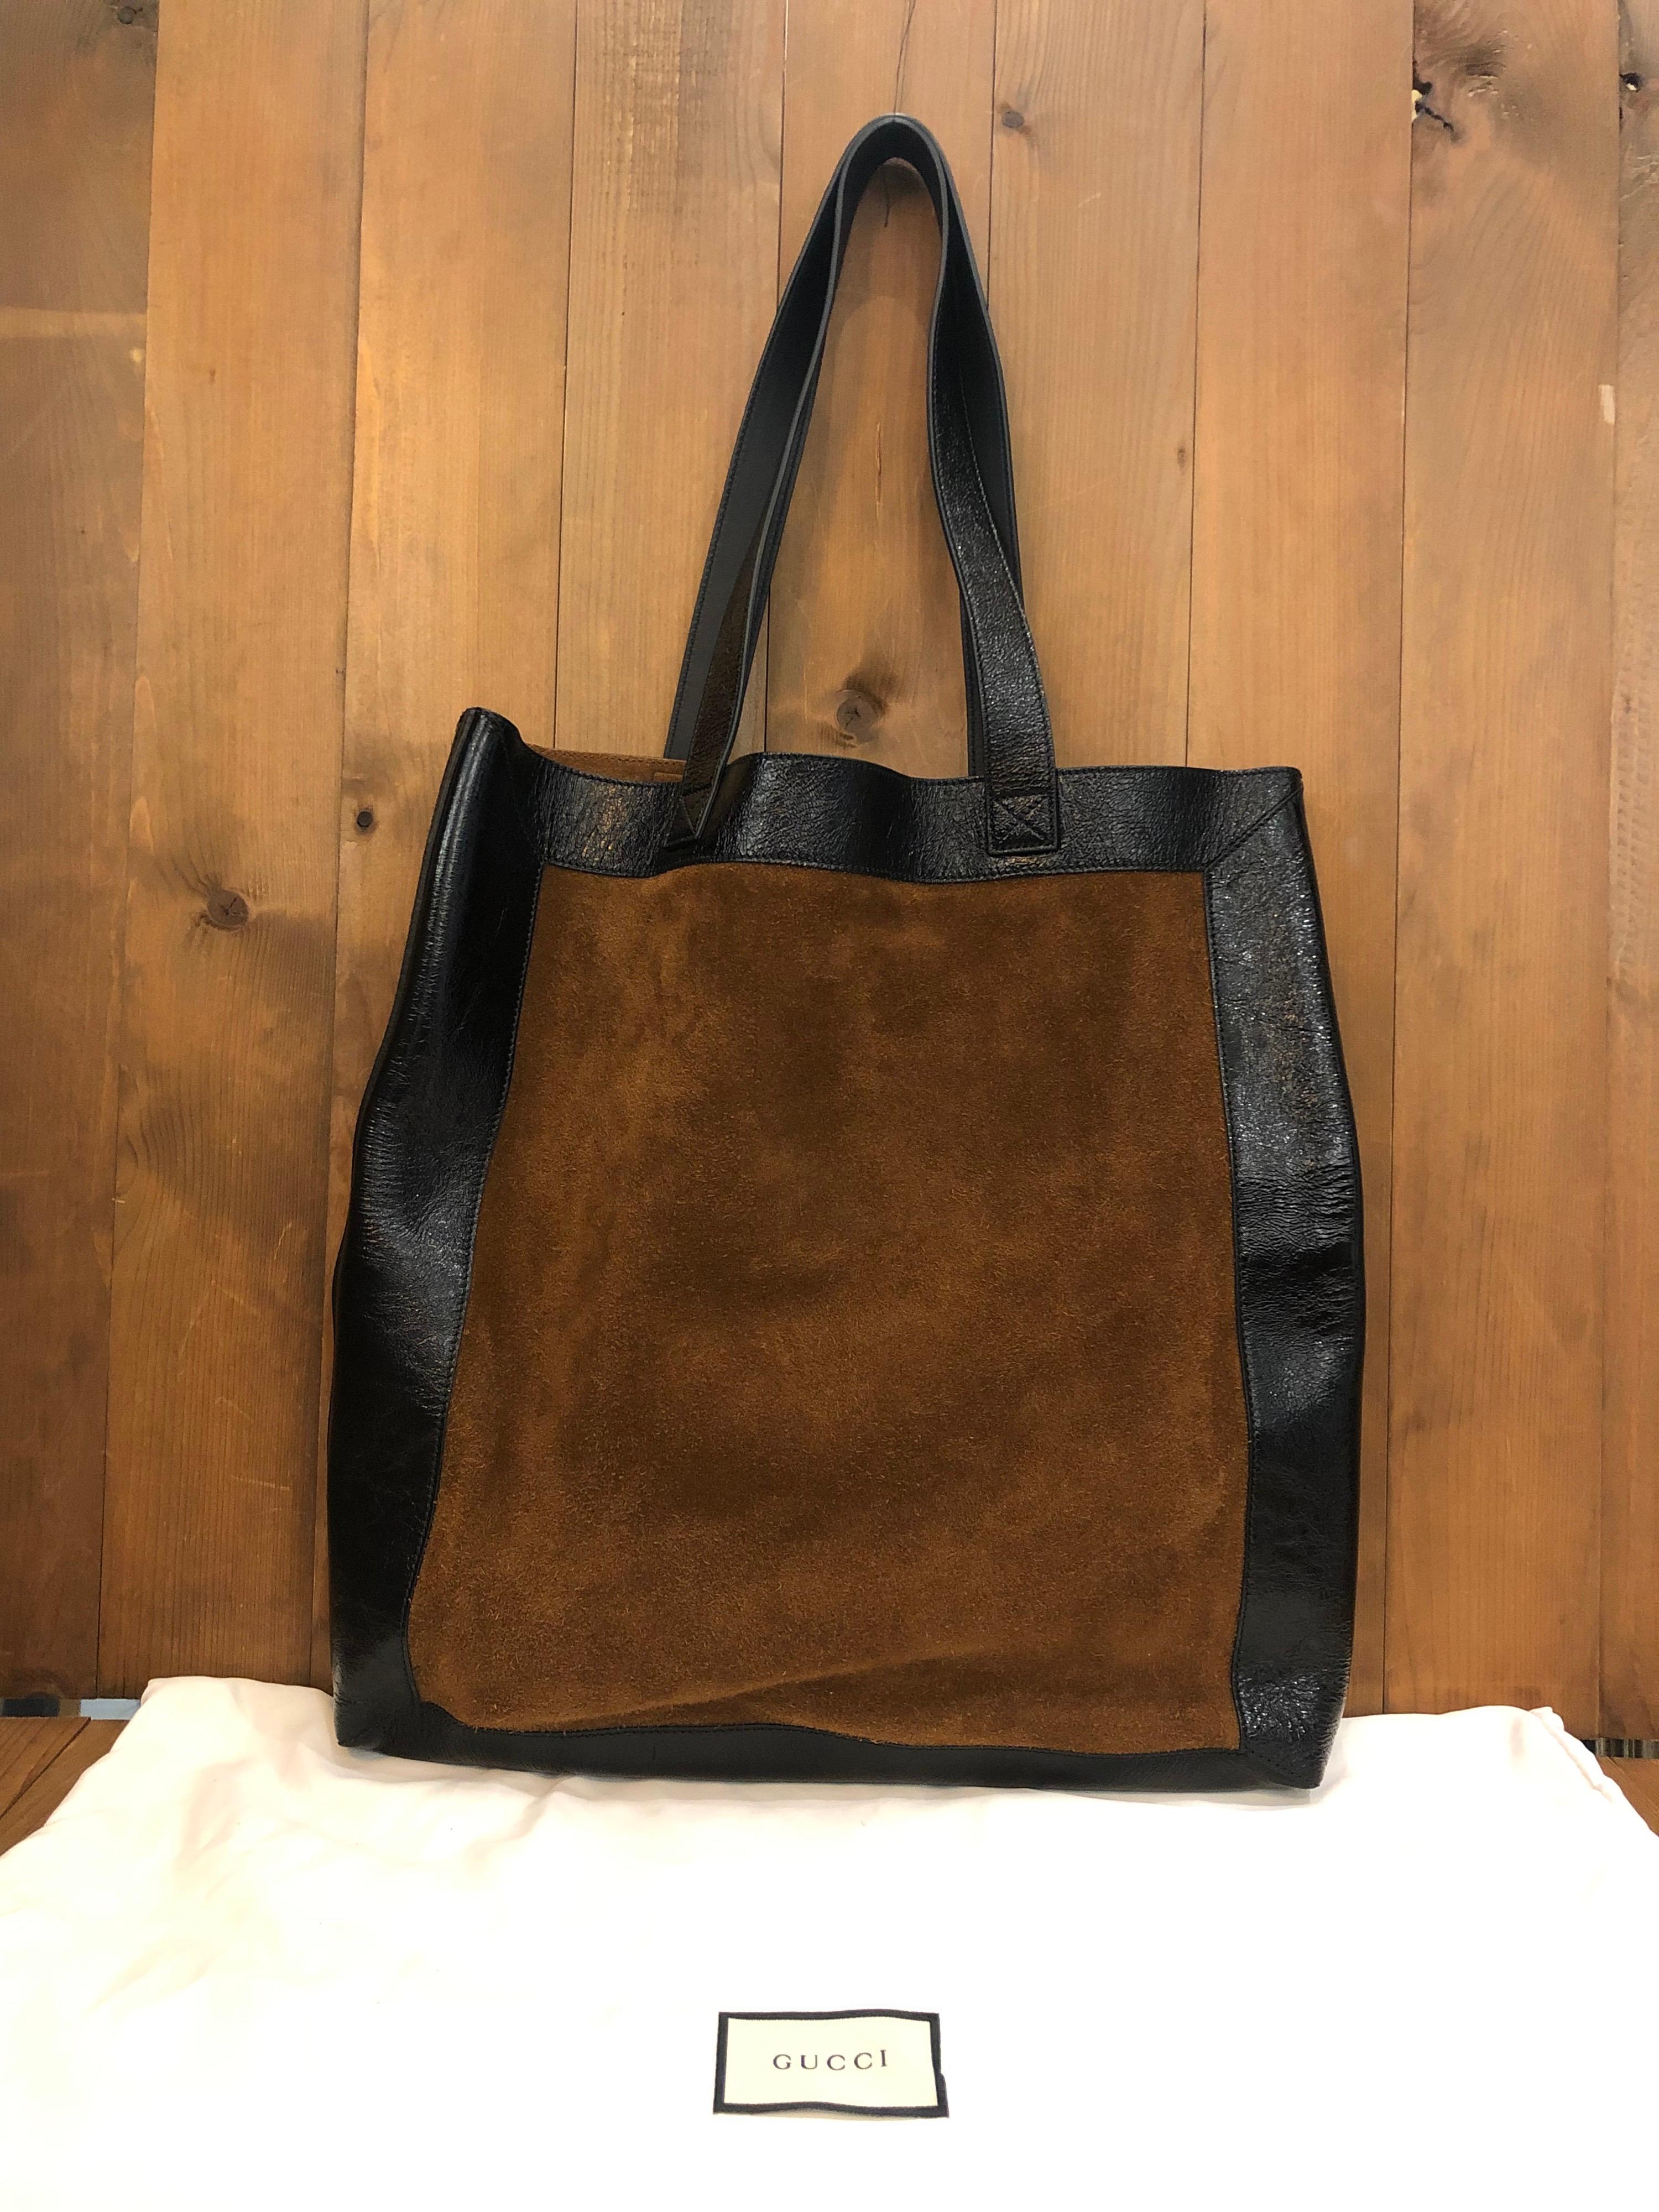 2010s GUCCI oversized tote in brown suede and black leather trimmings. It comes with a pouch in the same colored suede. Made in Italy. Measures approximately 18 x 17 x 2 inches handle drop 11 inches. Come with dust bag (lightly stained).

Condition